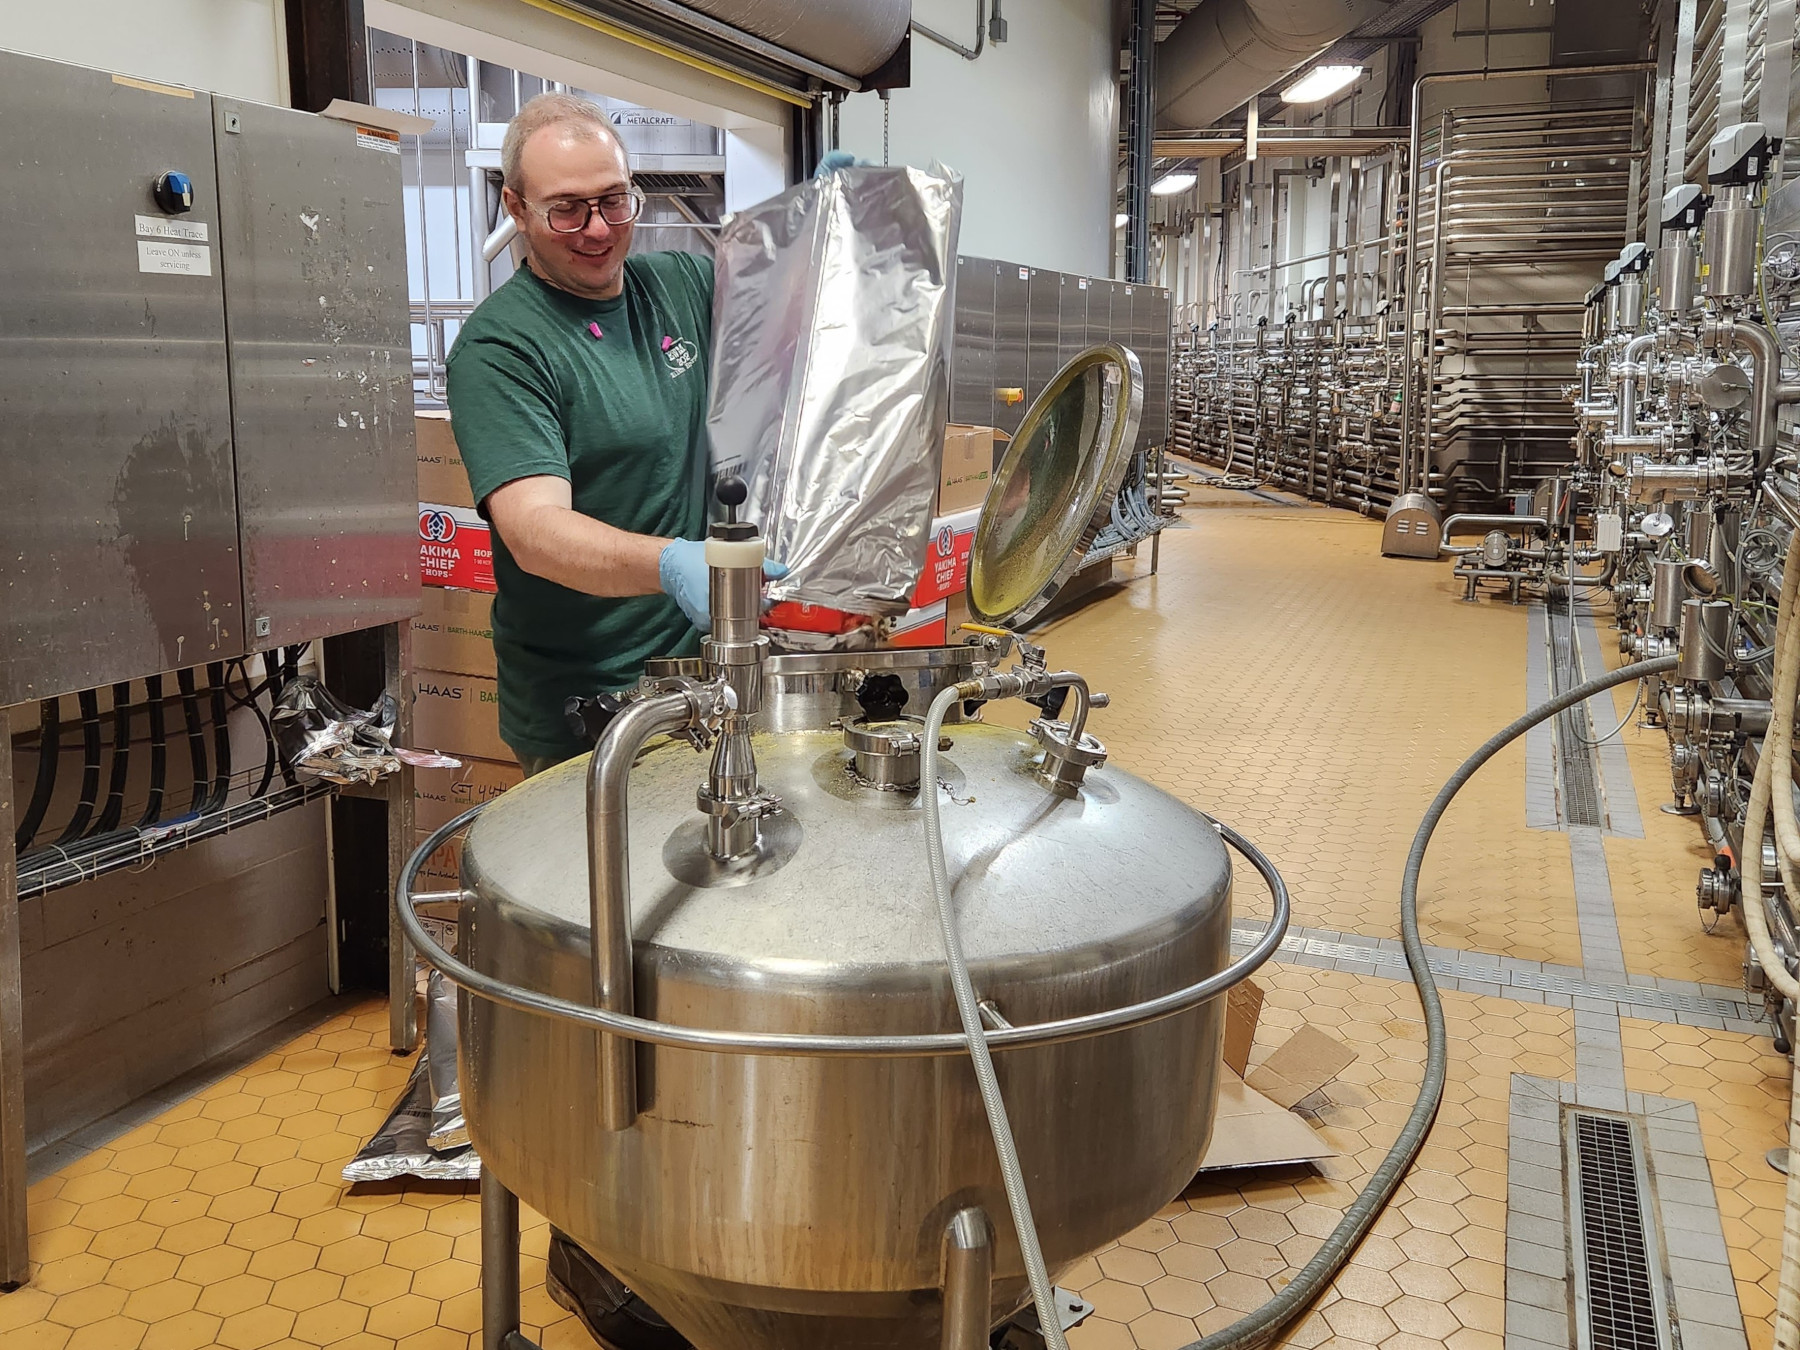 James Hanley using brewing equipment at Dogfish Head Brewery